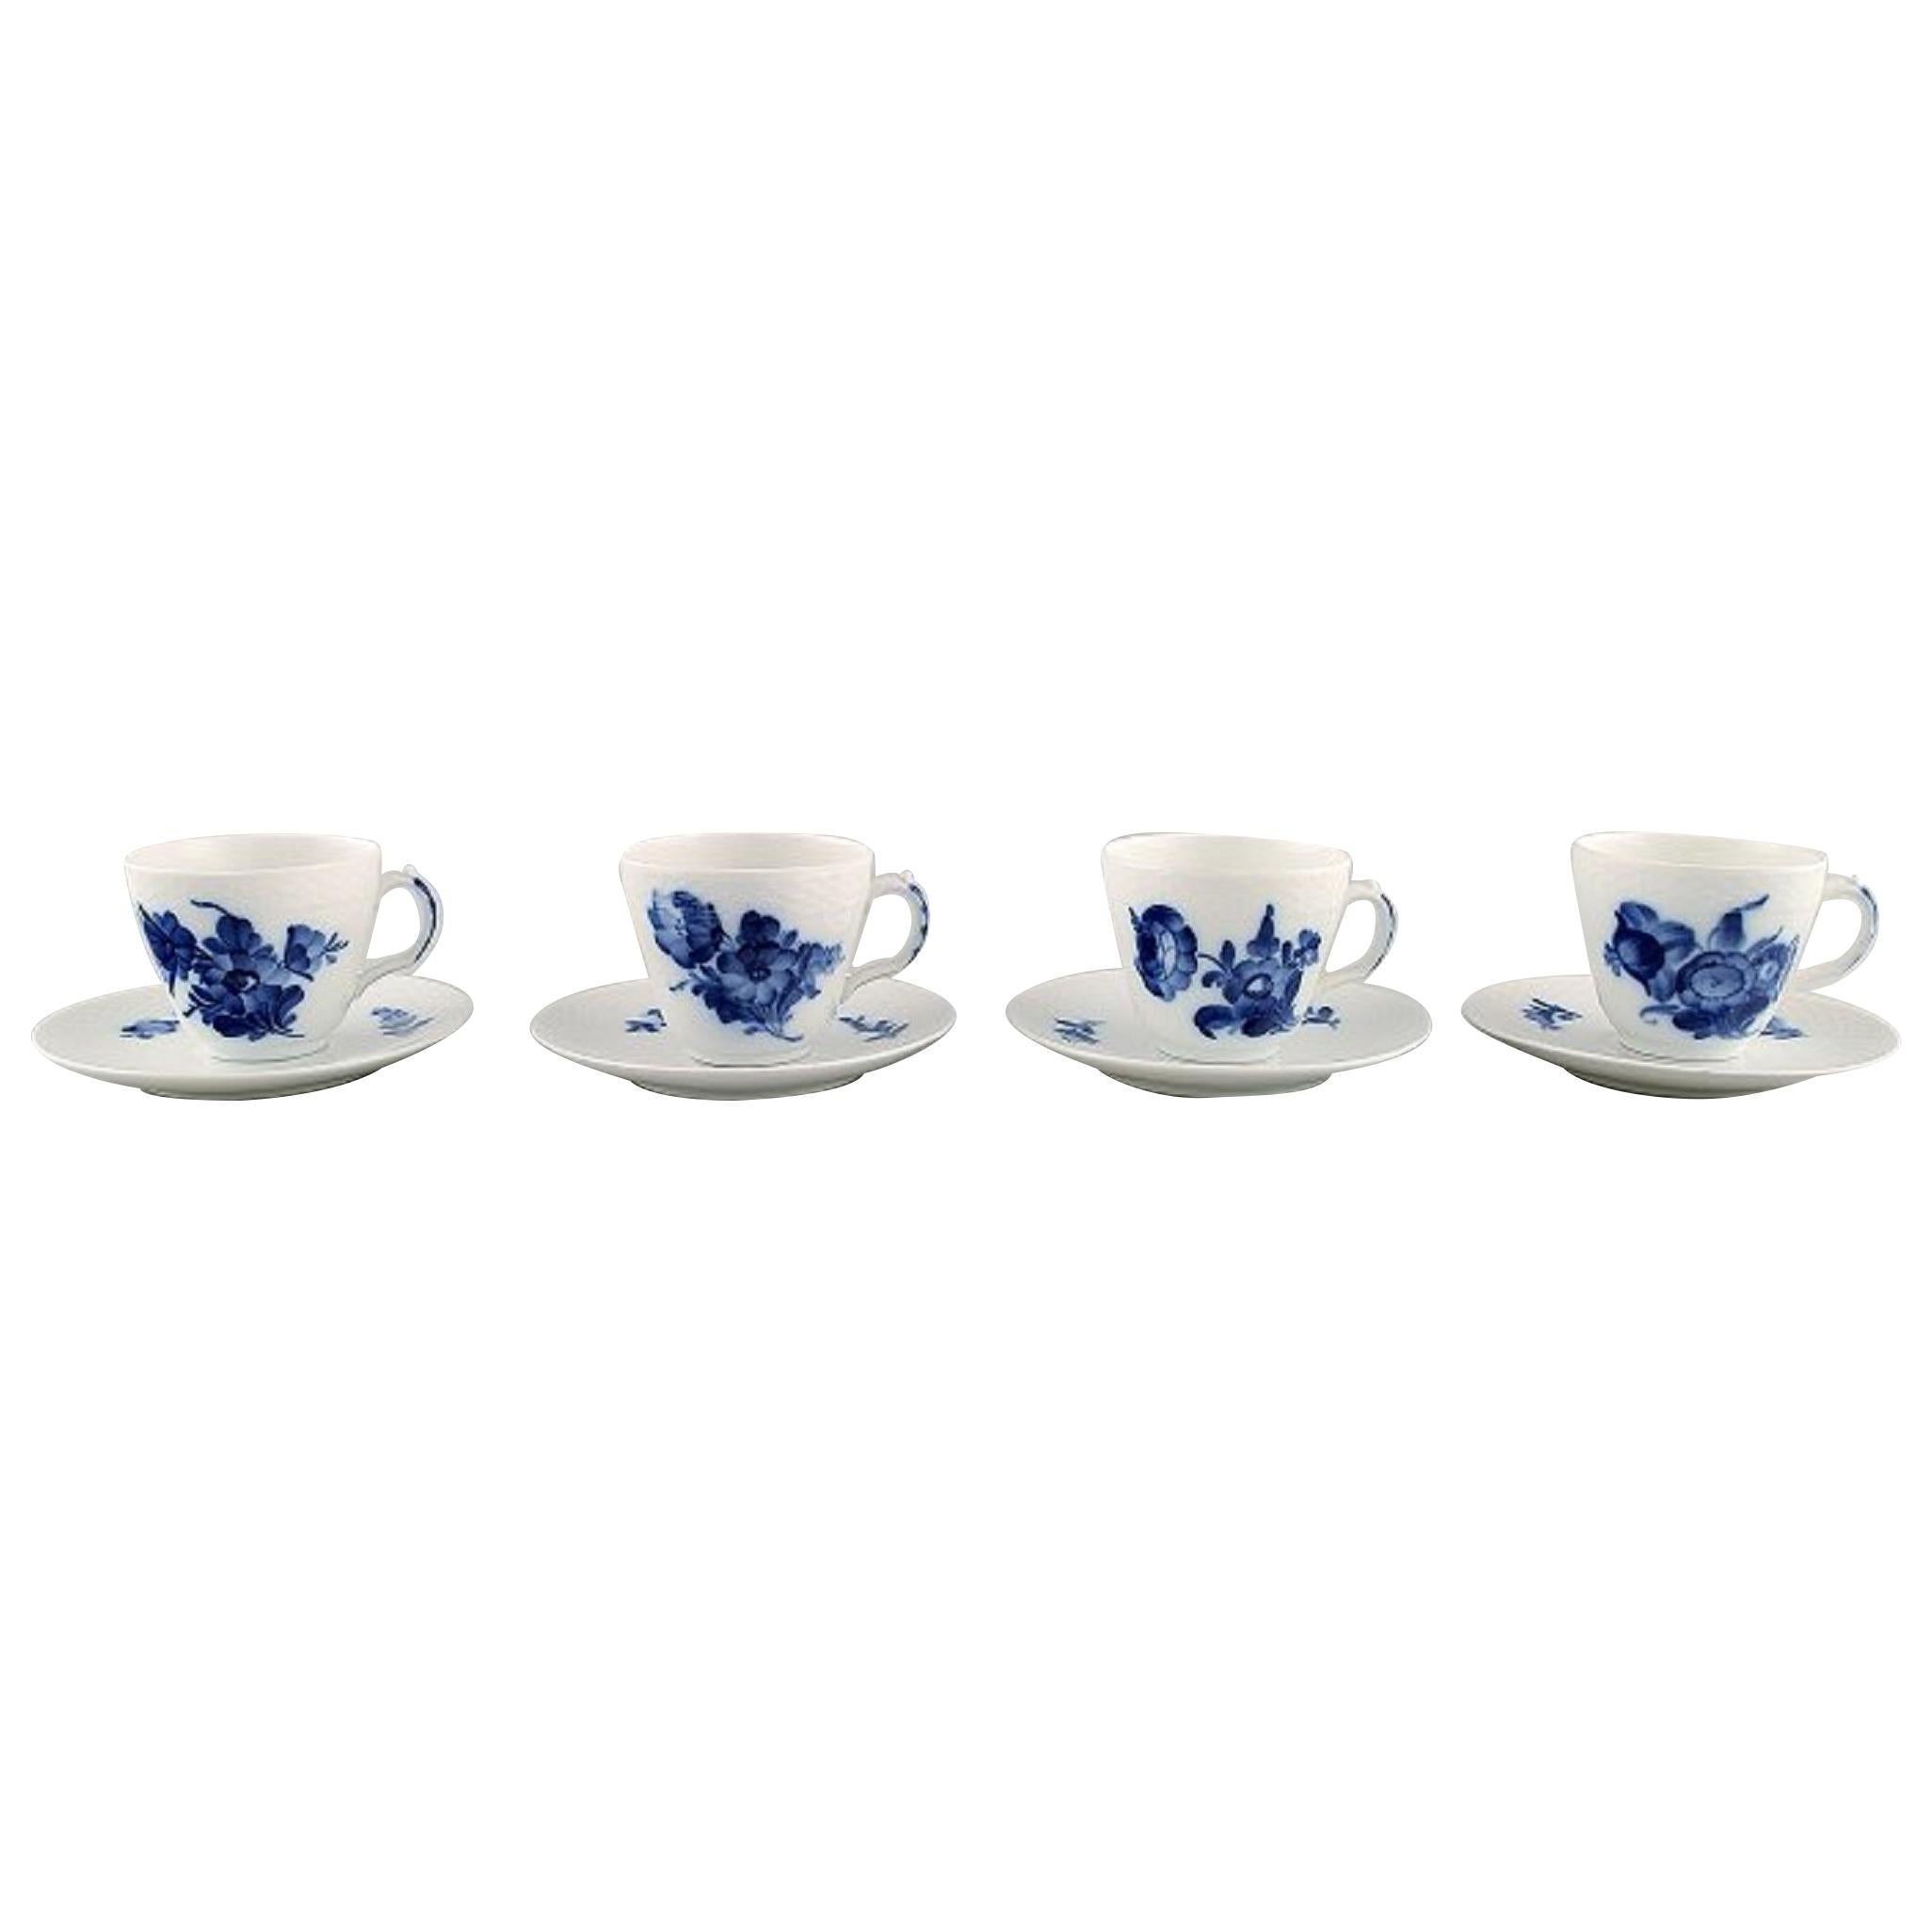 GuangYang Porcelain Coffee Cup and Saucer Set of 6-2.8 oz Vintage Floral Espresso Cups and Saucers 80ml New Bone China Cup Set Ideal for Coffee Hot Drinks 